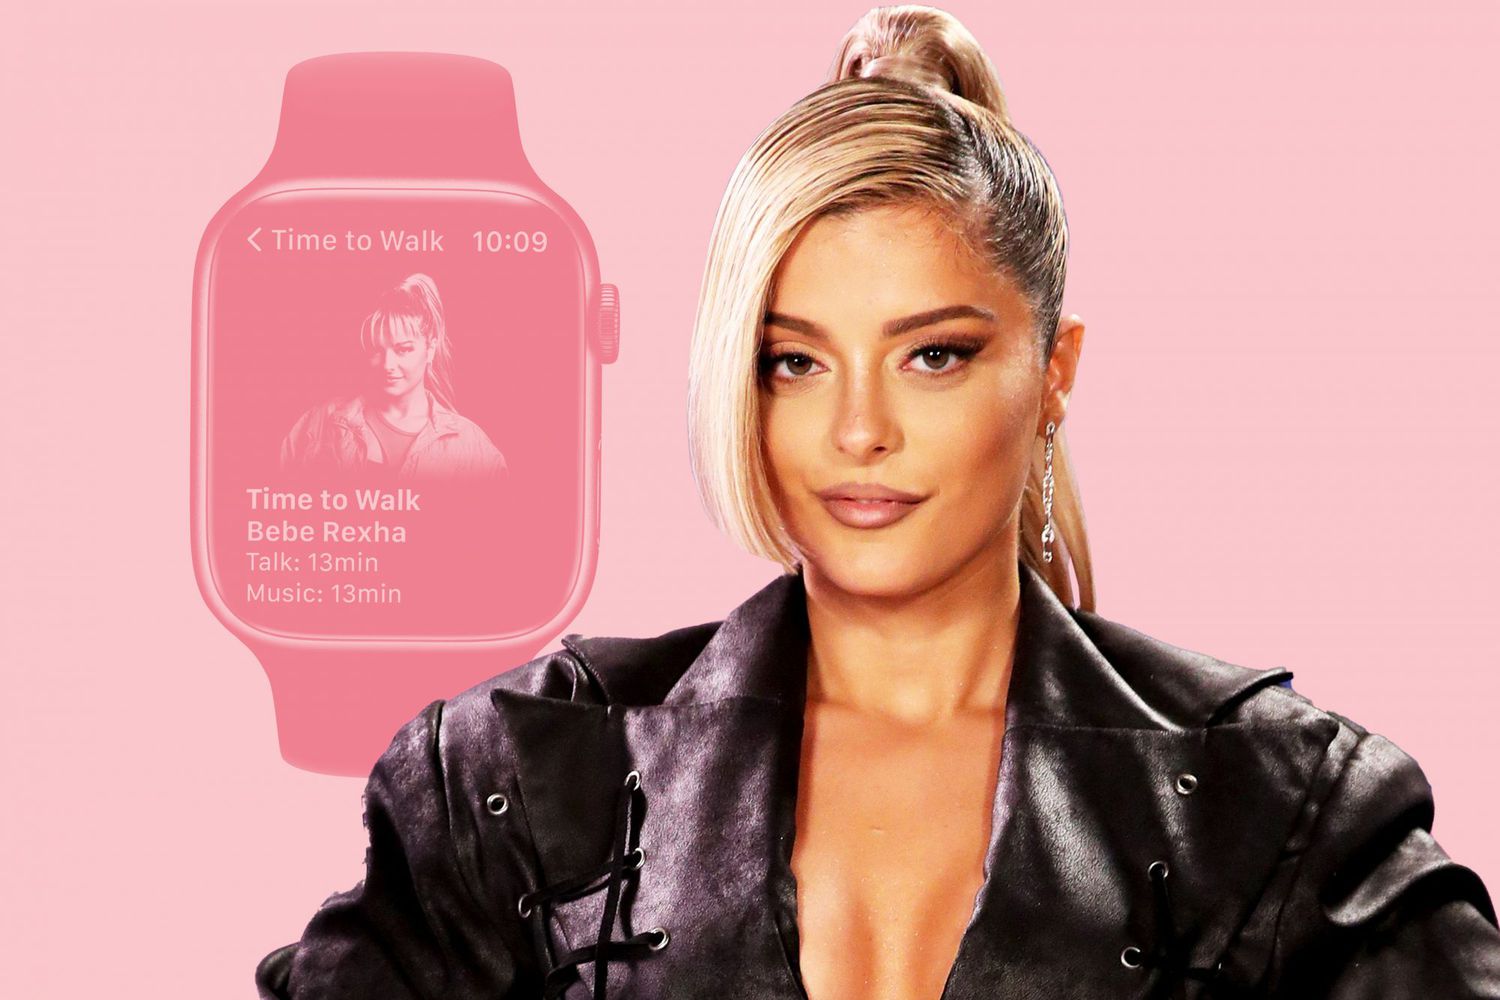 Bebe-Rexha-x-Apple's-Time-to-Walk-GettyImages-1269758083